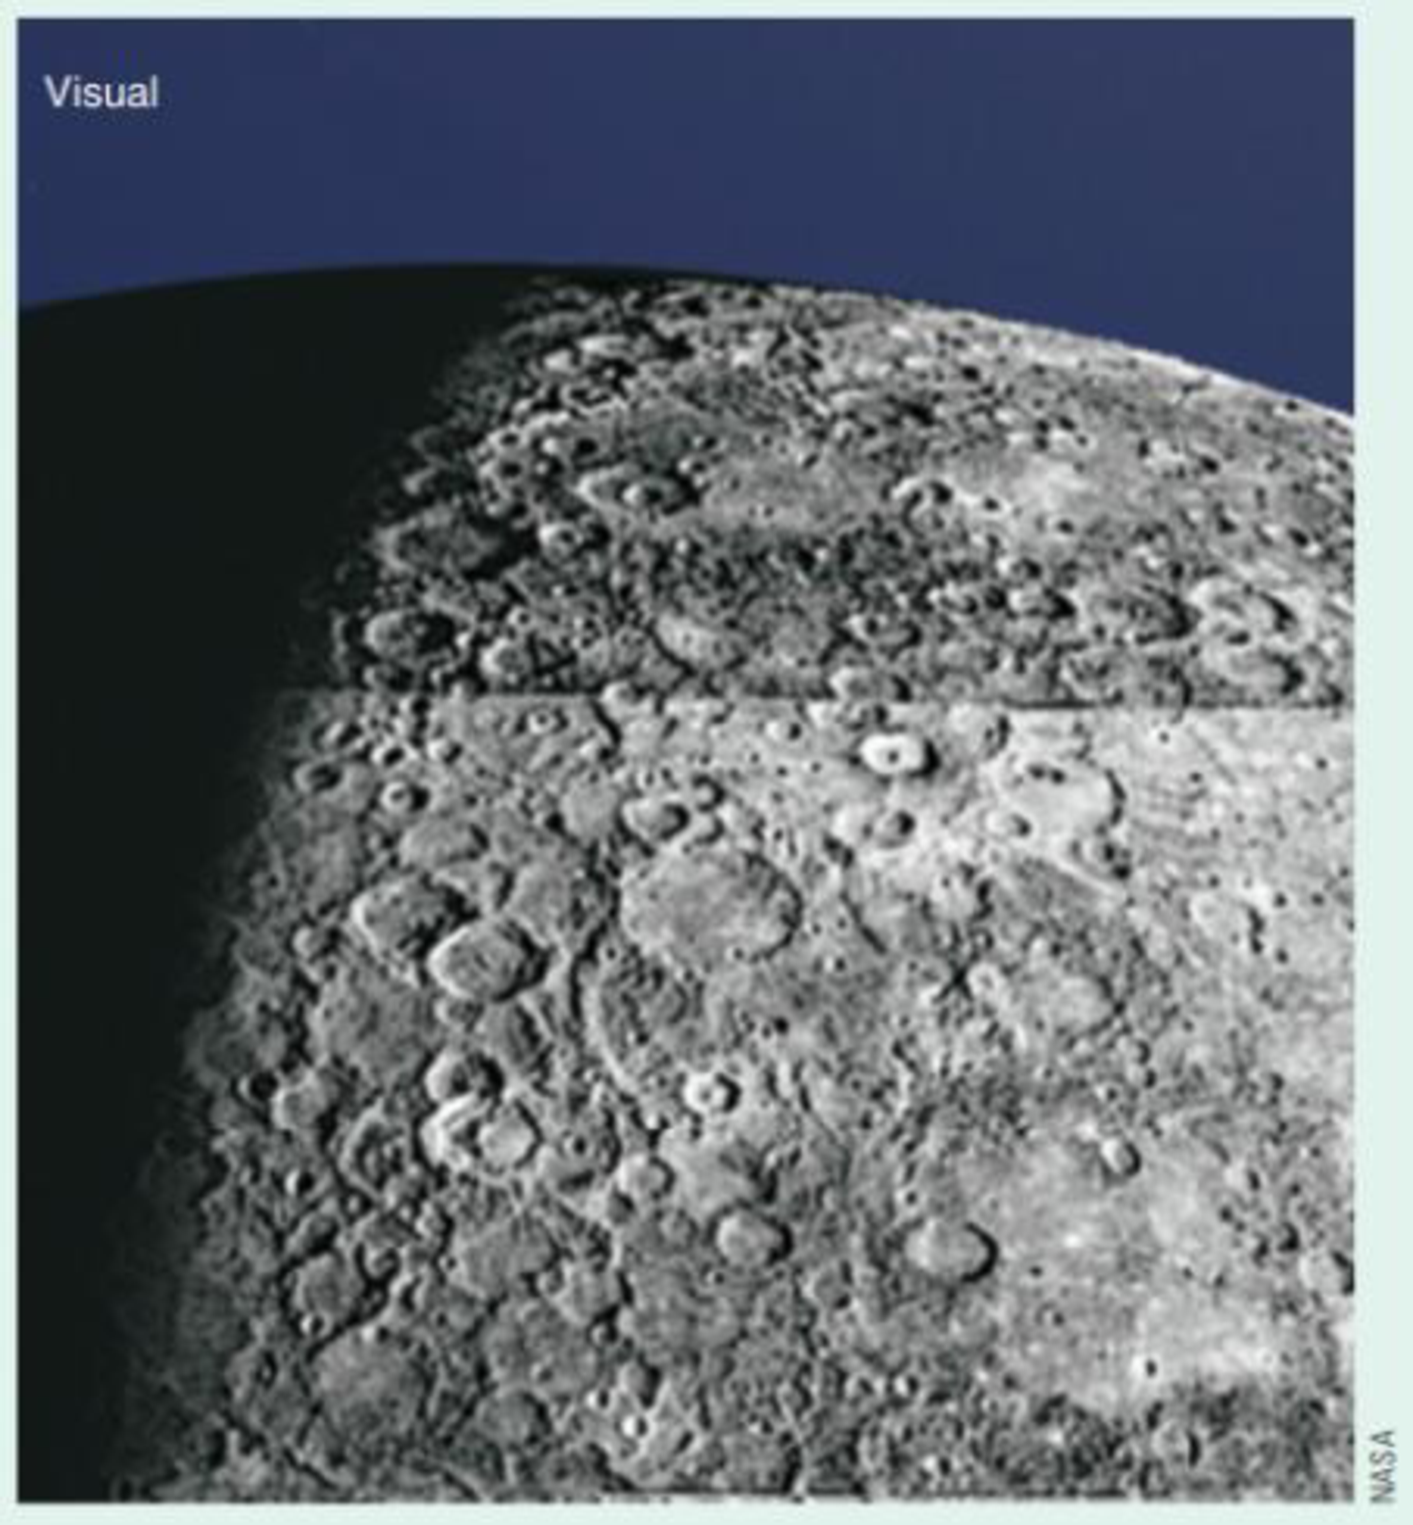 Chapter 19, Problem 2LTL, Why do astronomers conclude that the surface of Mercury, shown here, is old? When did the majority 